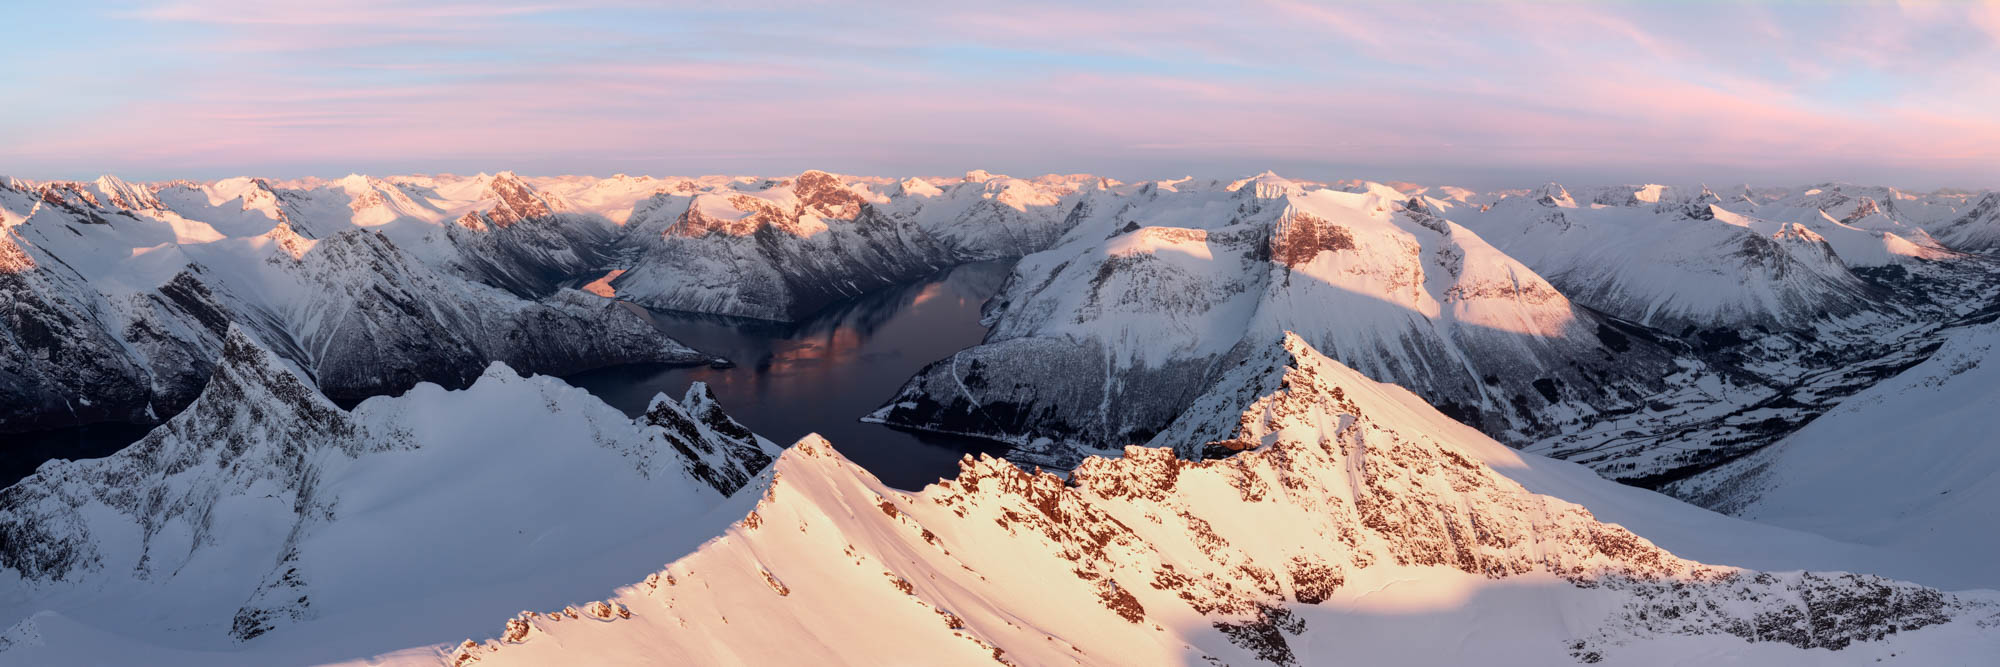 Aerial Panorama of Dalegubben Mountain and Hjørundfjord in Norway